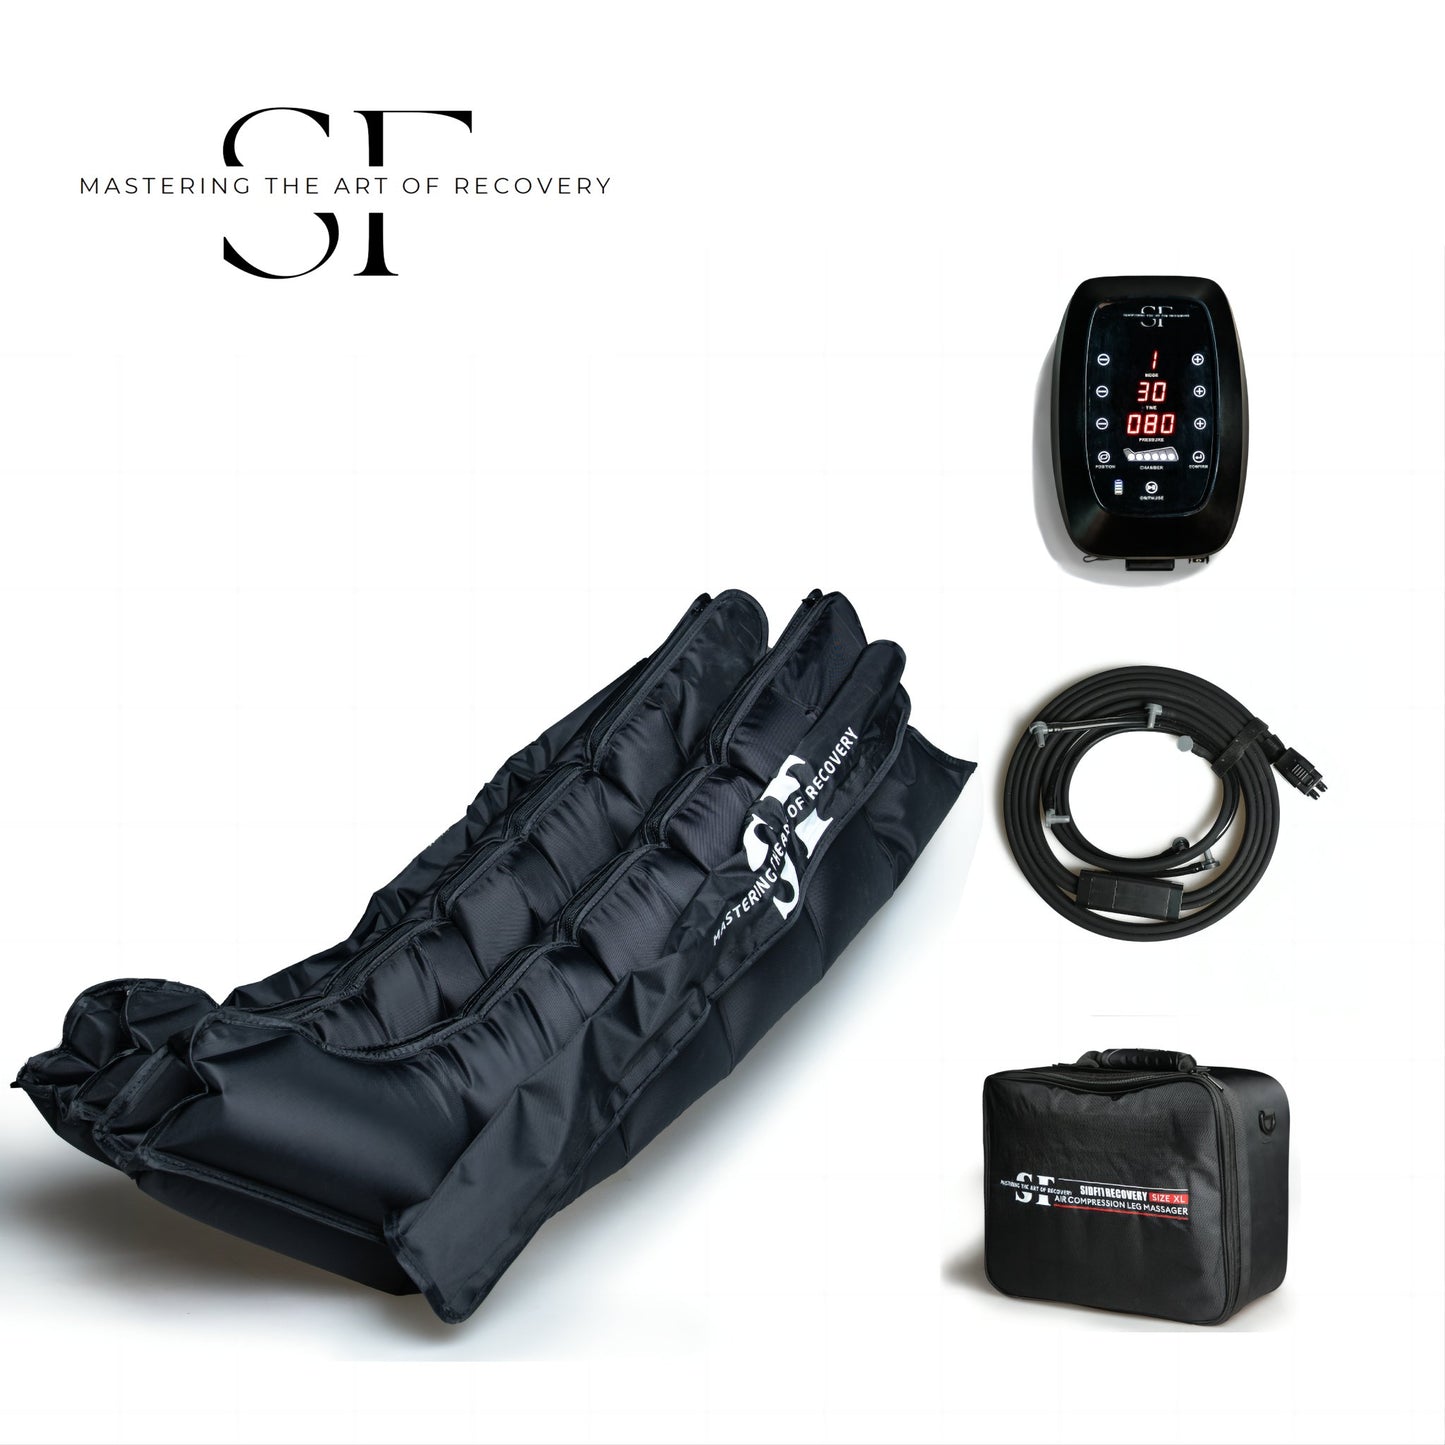 Sidfit Recovery Boots Pro - Sidfit